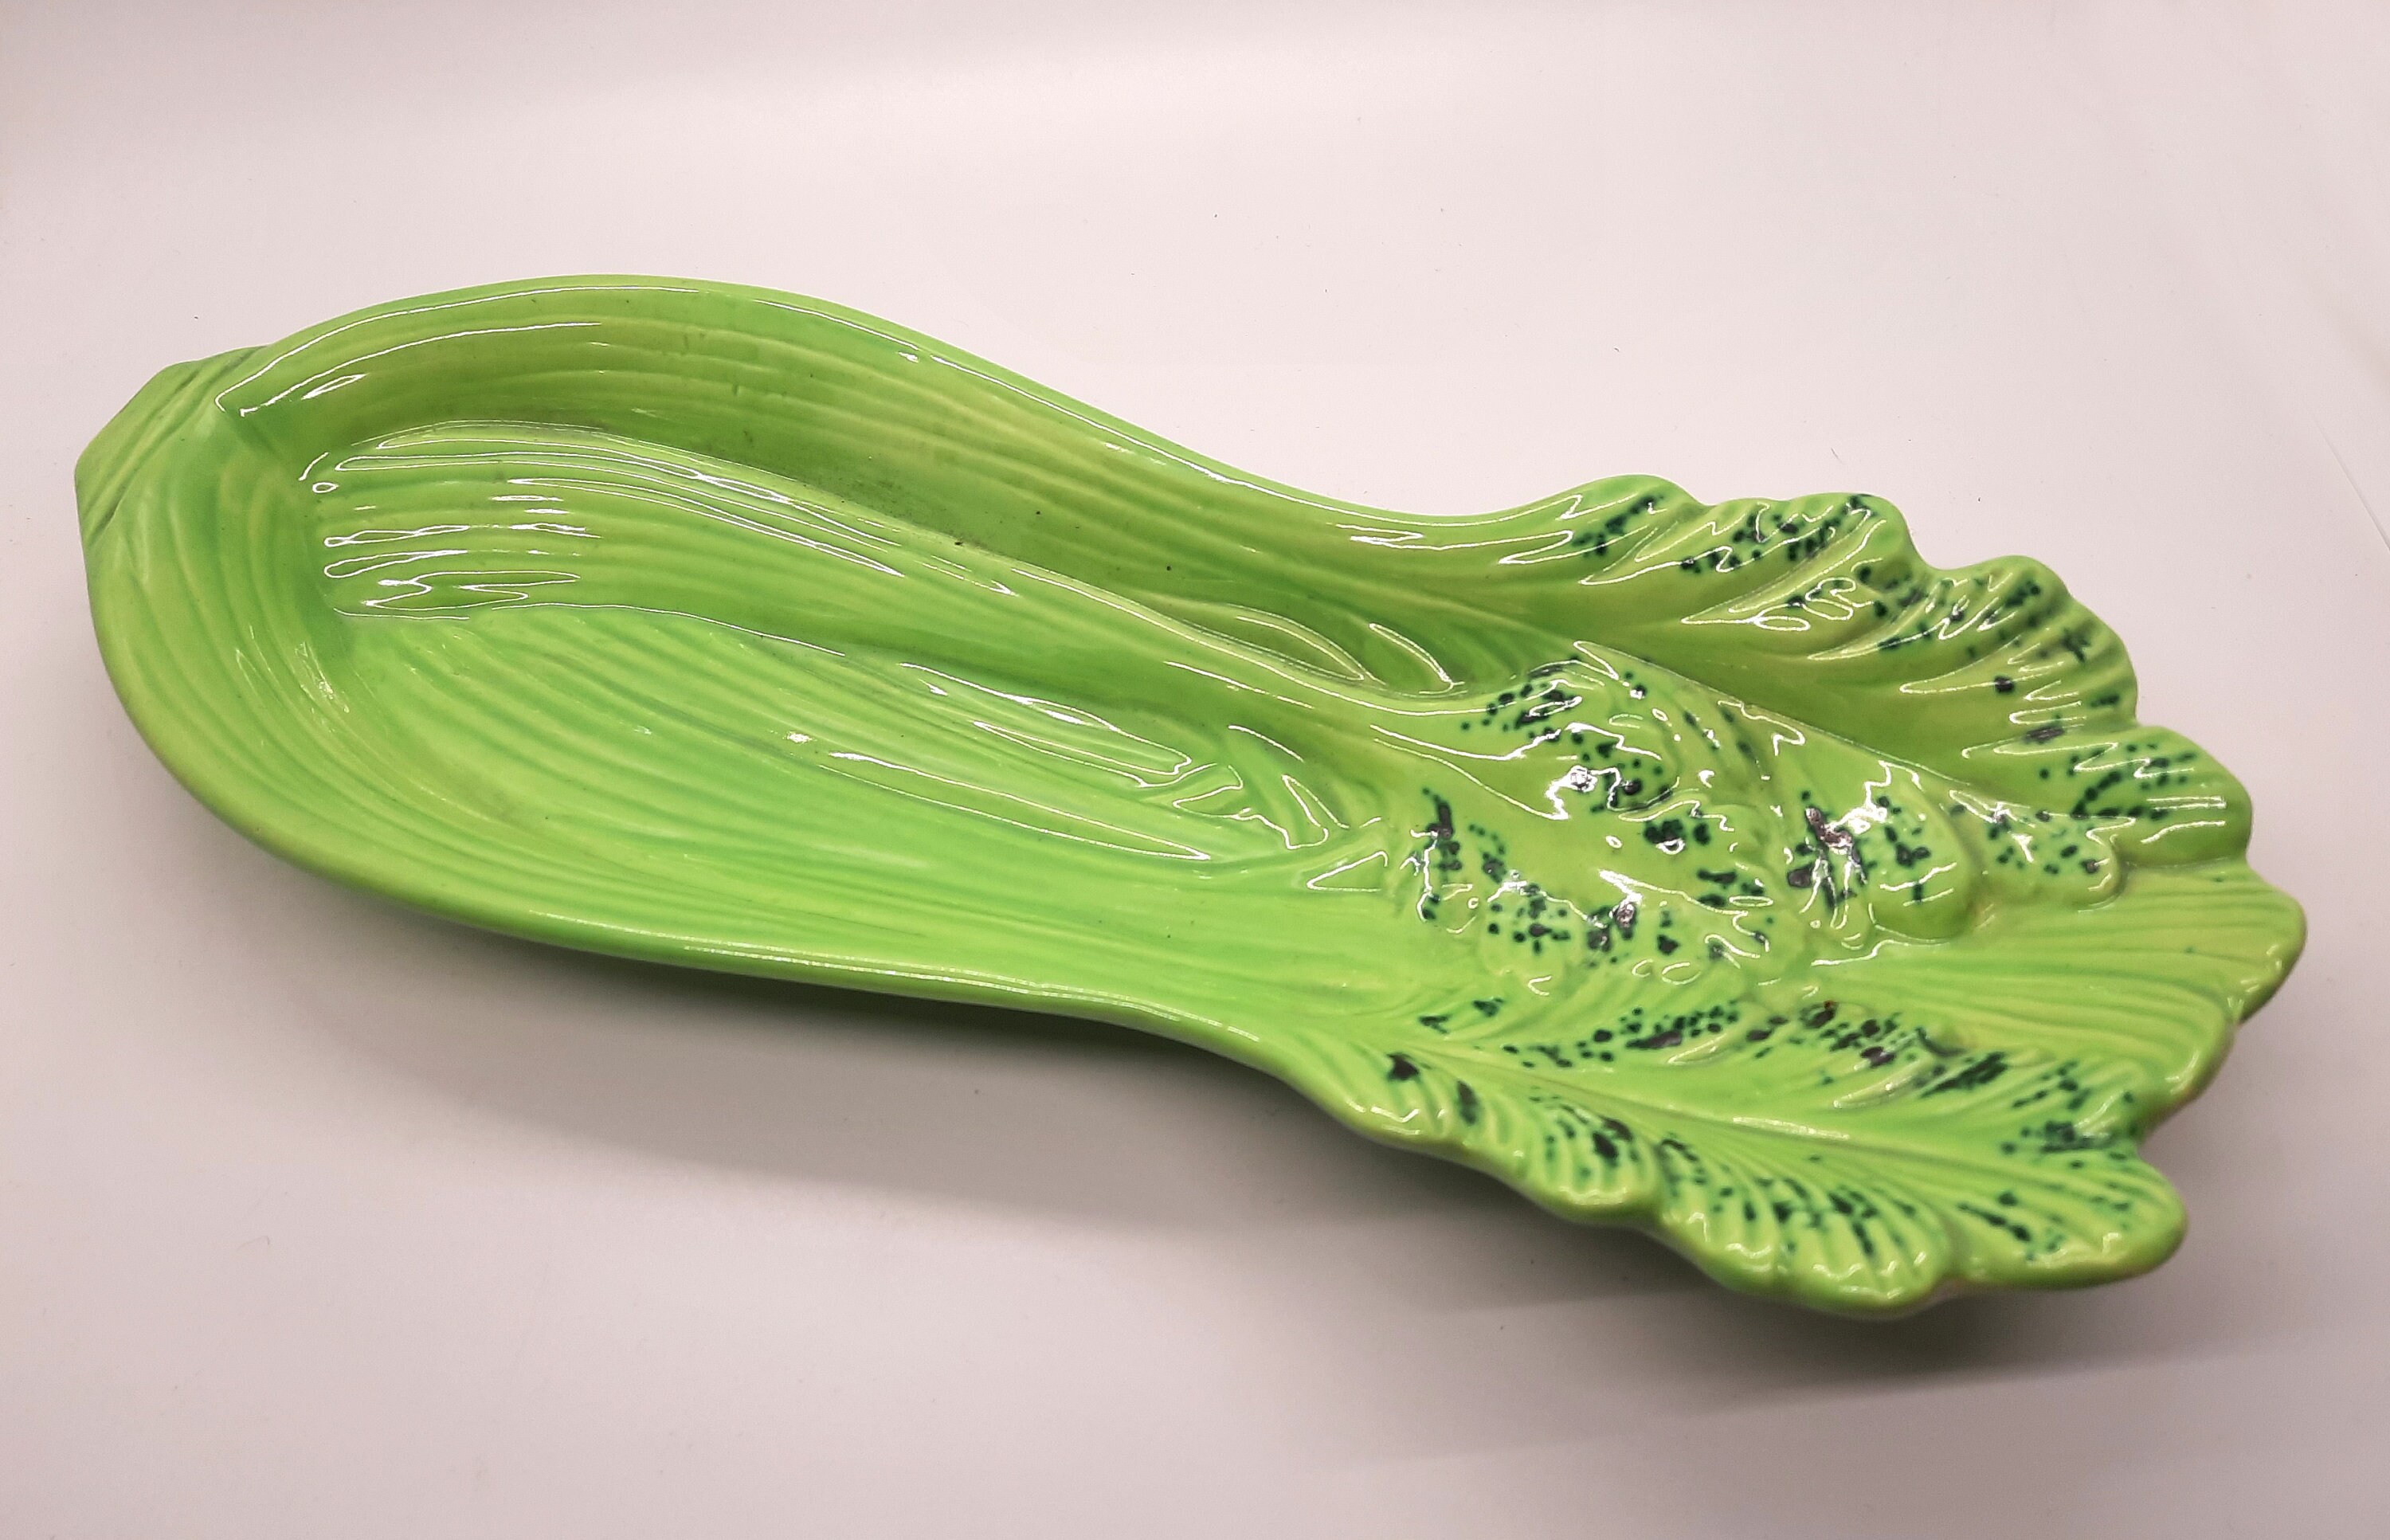 Vintage 1960s Hand Painted Ceramic Green Celery Serving Dish